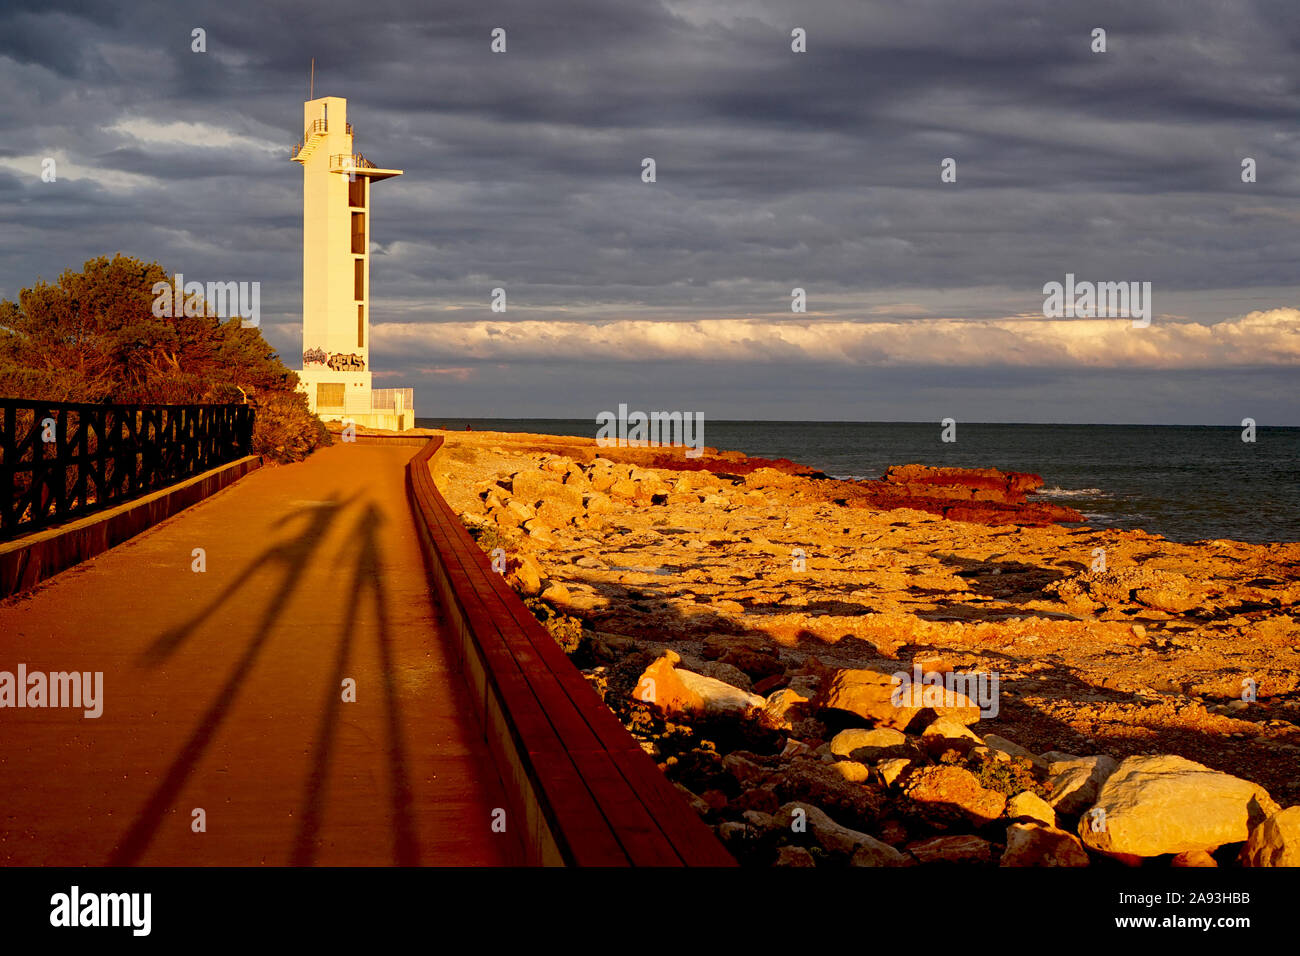 Shadow figures of a couple at sunset by a coastal scene with lighthouse Stock Photo